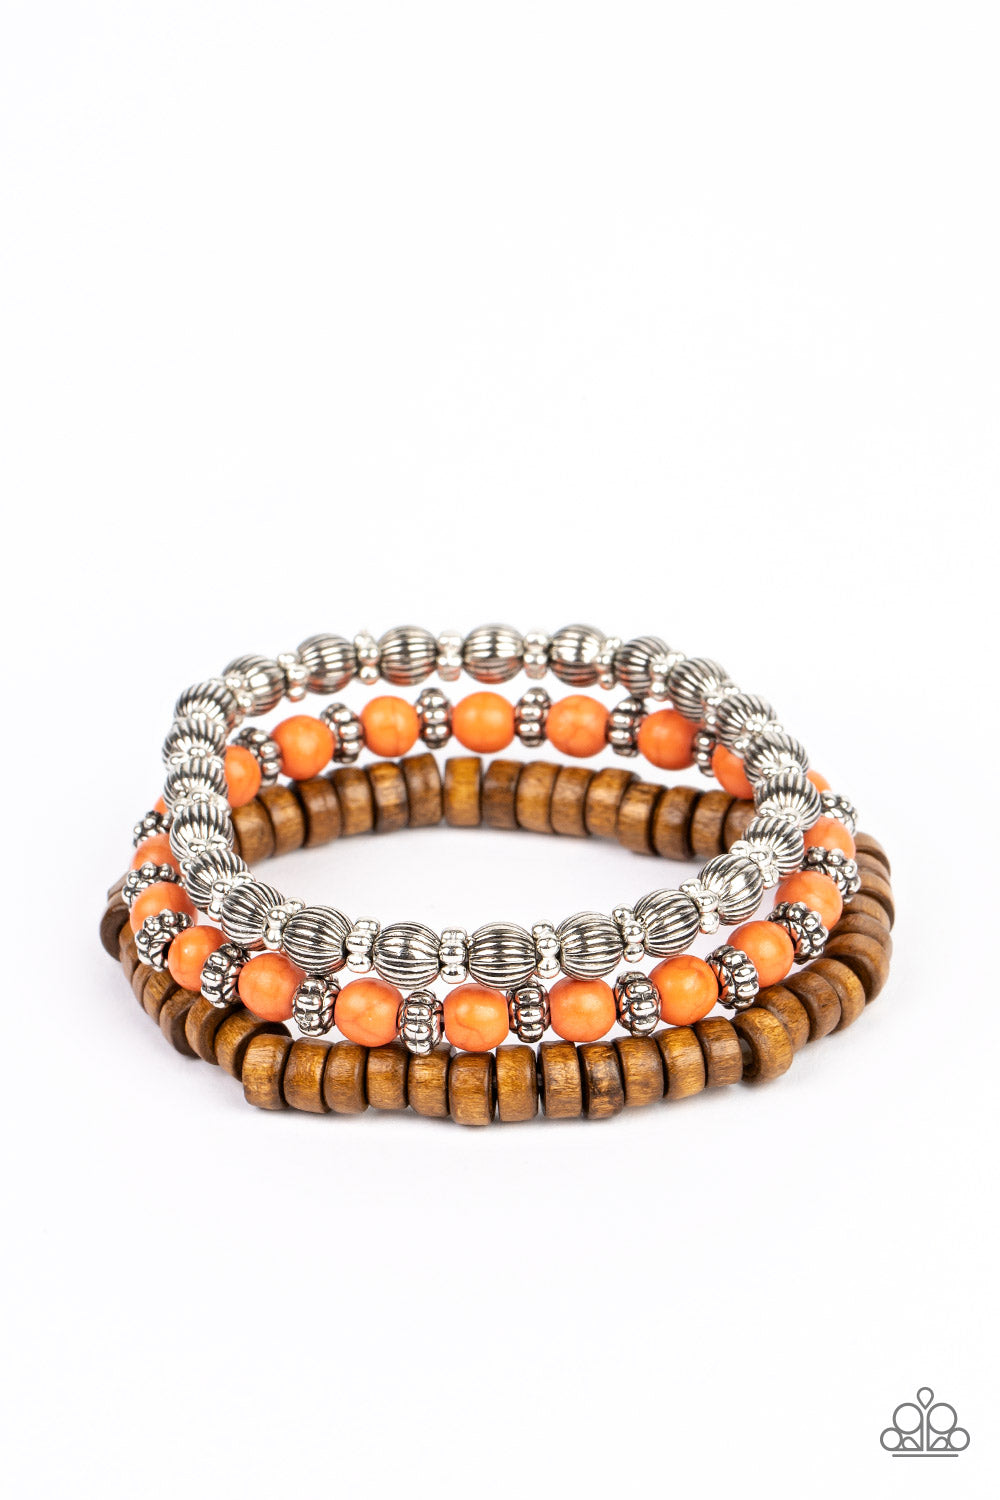 ESCAPADE Route Orange Bracelet - Paparazzi Accessories  Vivacious orange stone beads, wooden beads, and antiqued silver beads are threaded along elastic stretchy bands. Sprinkled between the colorful beads are dainty silver-studded flower beads for a whimsical finish.  Sold as one set of three bracelets.